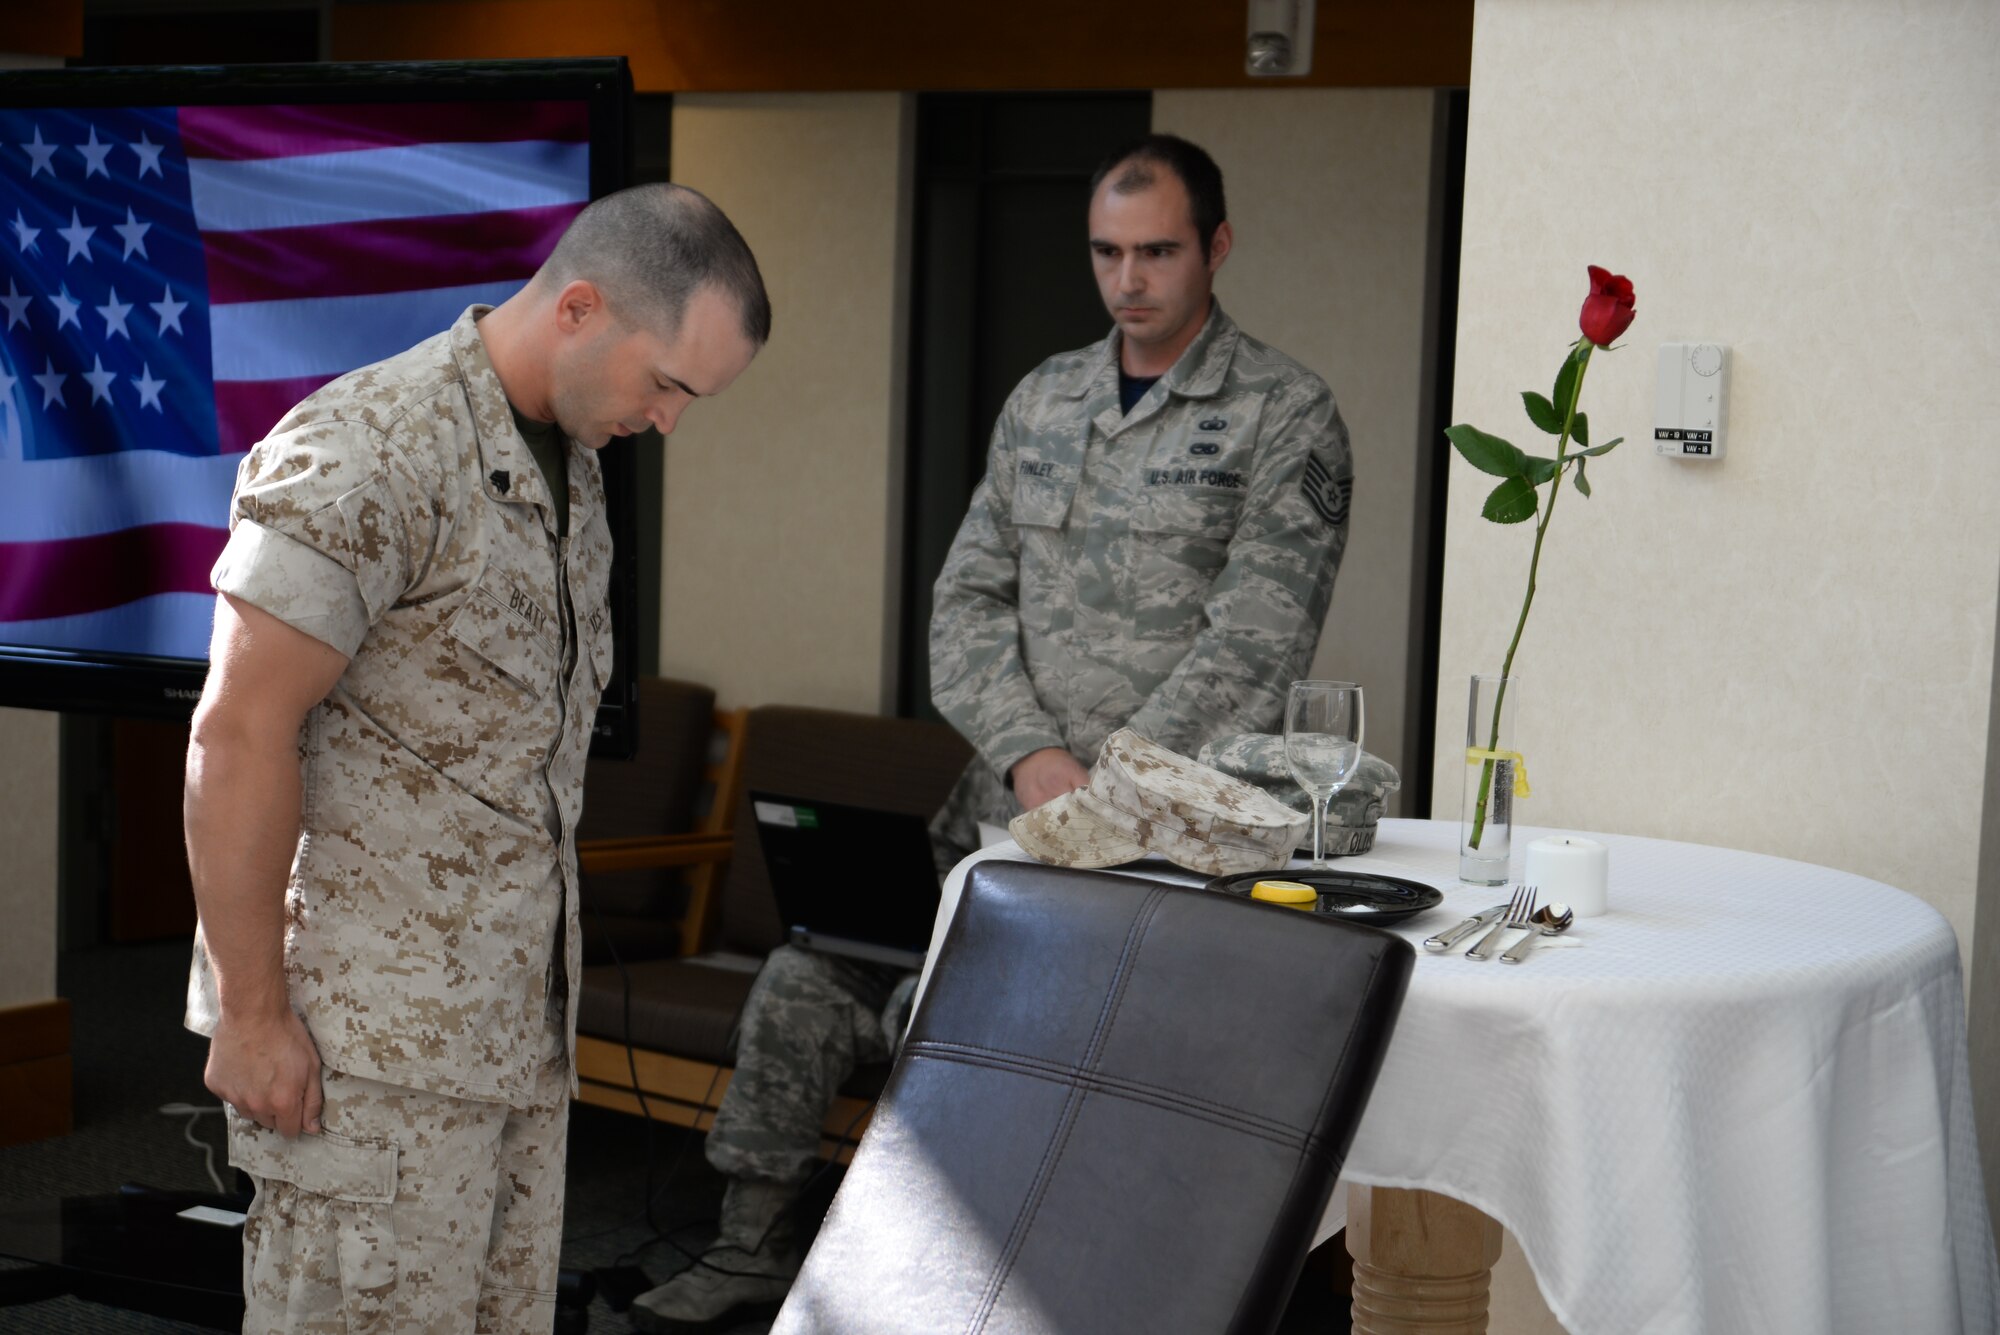 Marine Corps Sgt. Landon Beaty pays his respects after he places his cover on the POW/MIA table during a remembrance ceremony in the atrium of the Charles C. Carson Center for Mortuary Affairs, Dover Air Force Base, Del., Sept. 19, 2014. A representative from each service placed a hat representing their service in honor of all those still missing in action. Beaty, a former liaison at the mortuary is assigned to Marine Corps Station Quantico, Va. (U.S. Air Force photo/Master Sgt. Chris Gish)